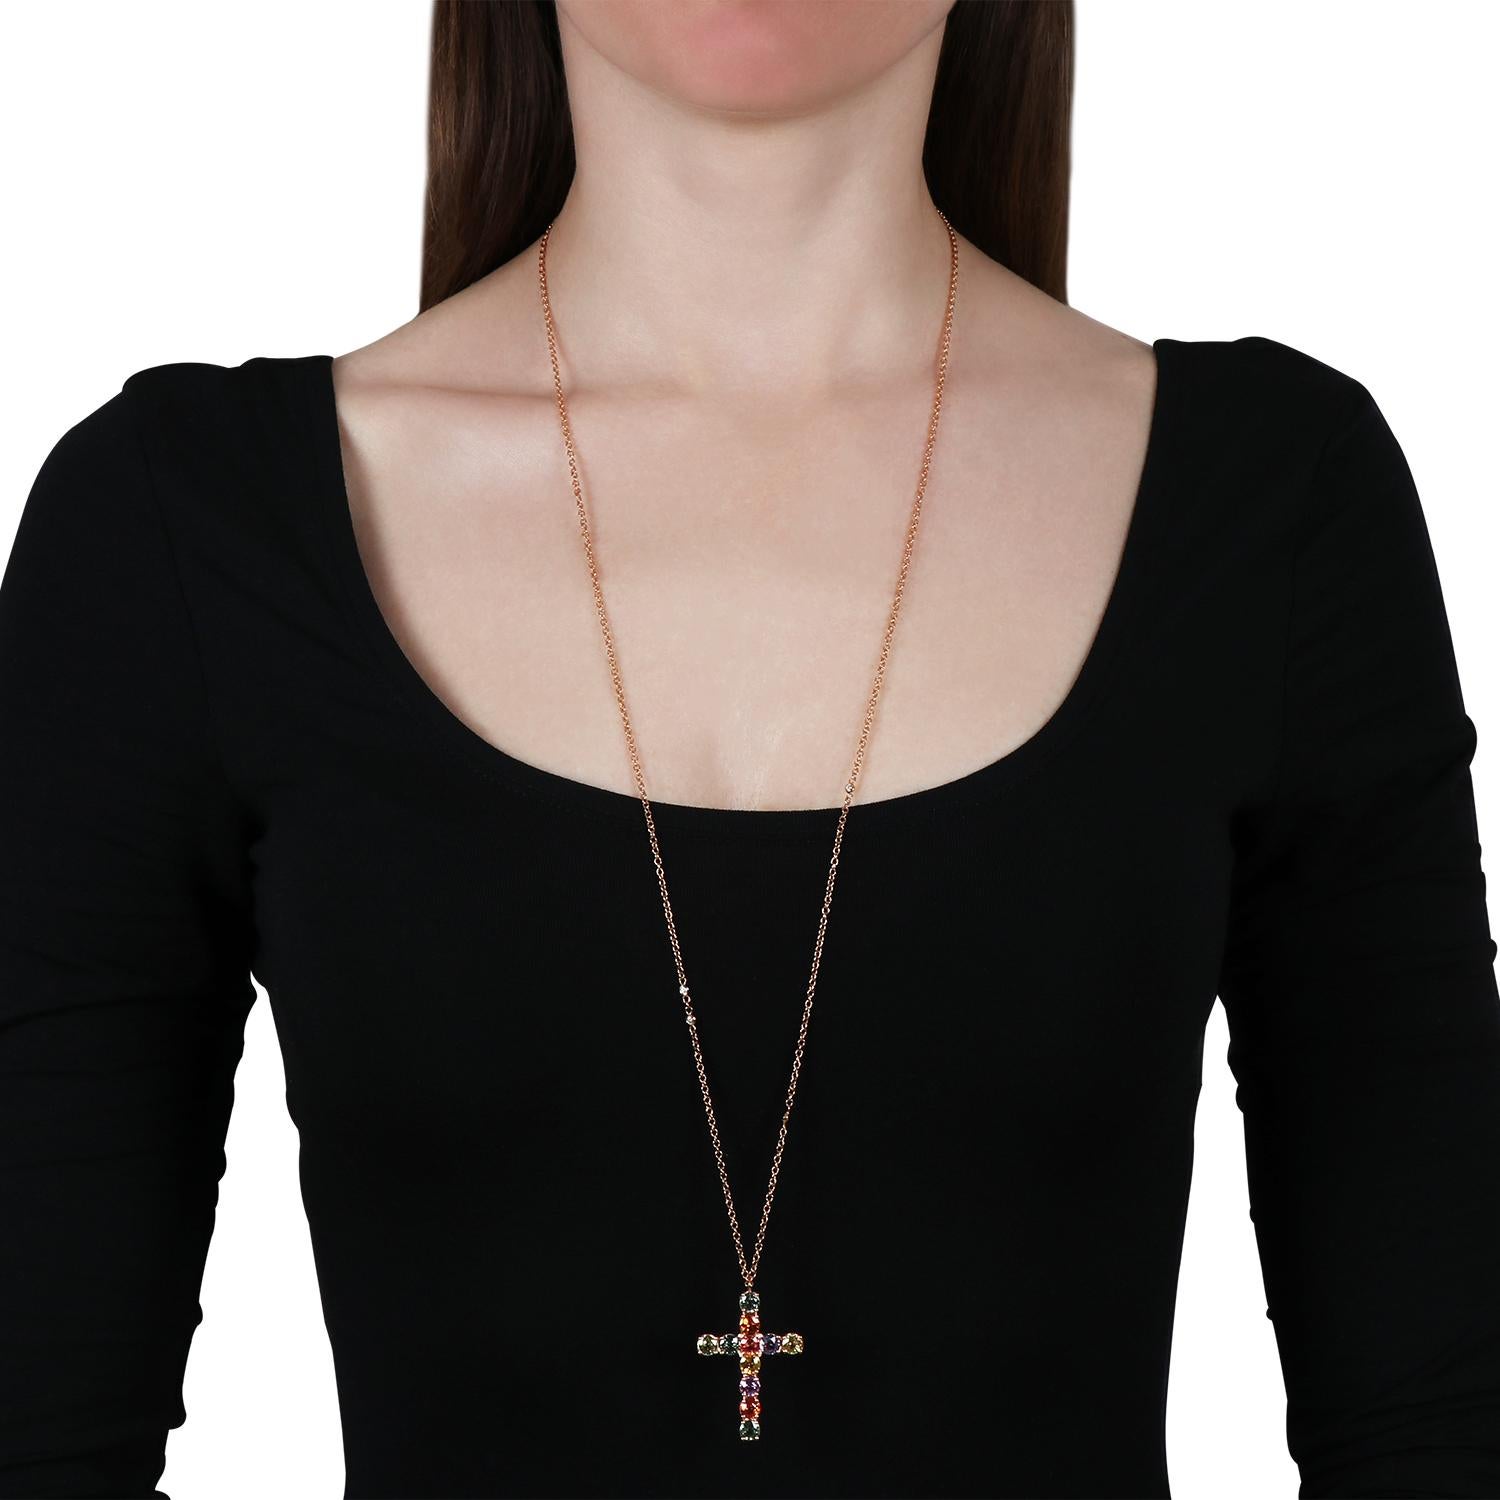 Women's Pendant necklace with 18kt rose gold cross pendant For Sale